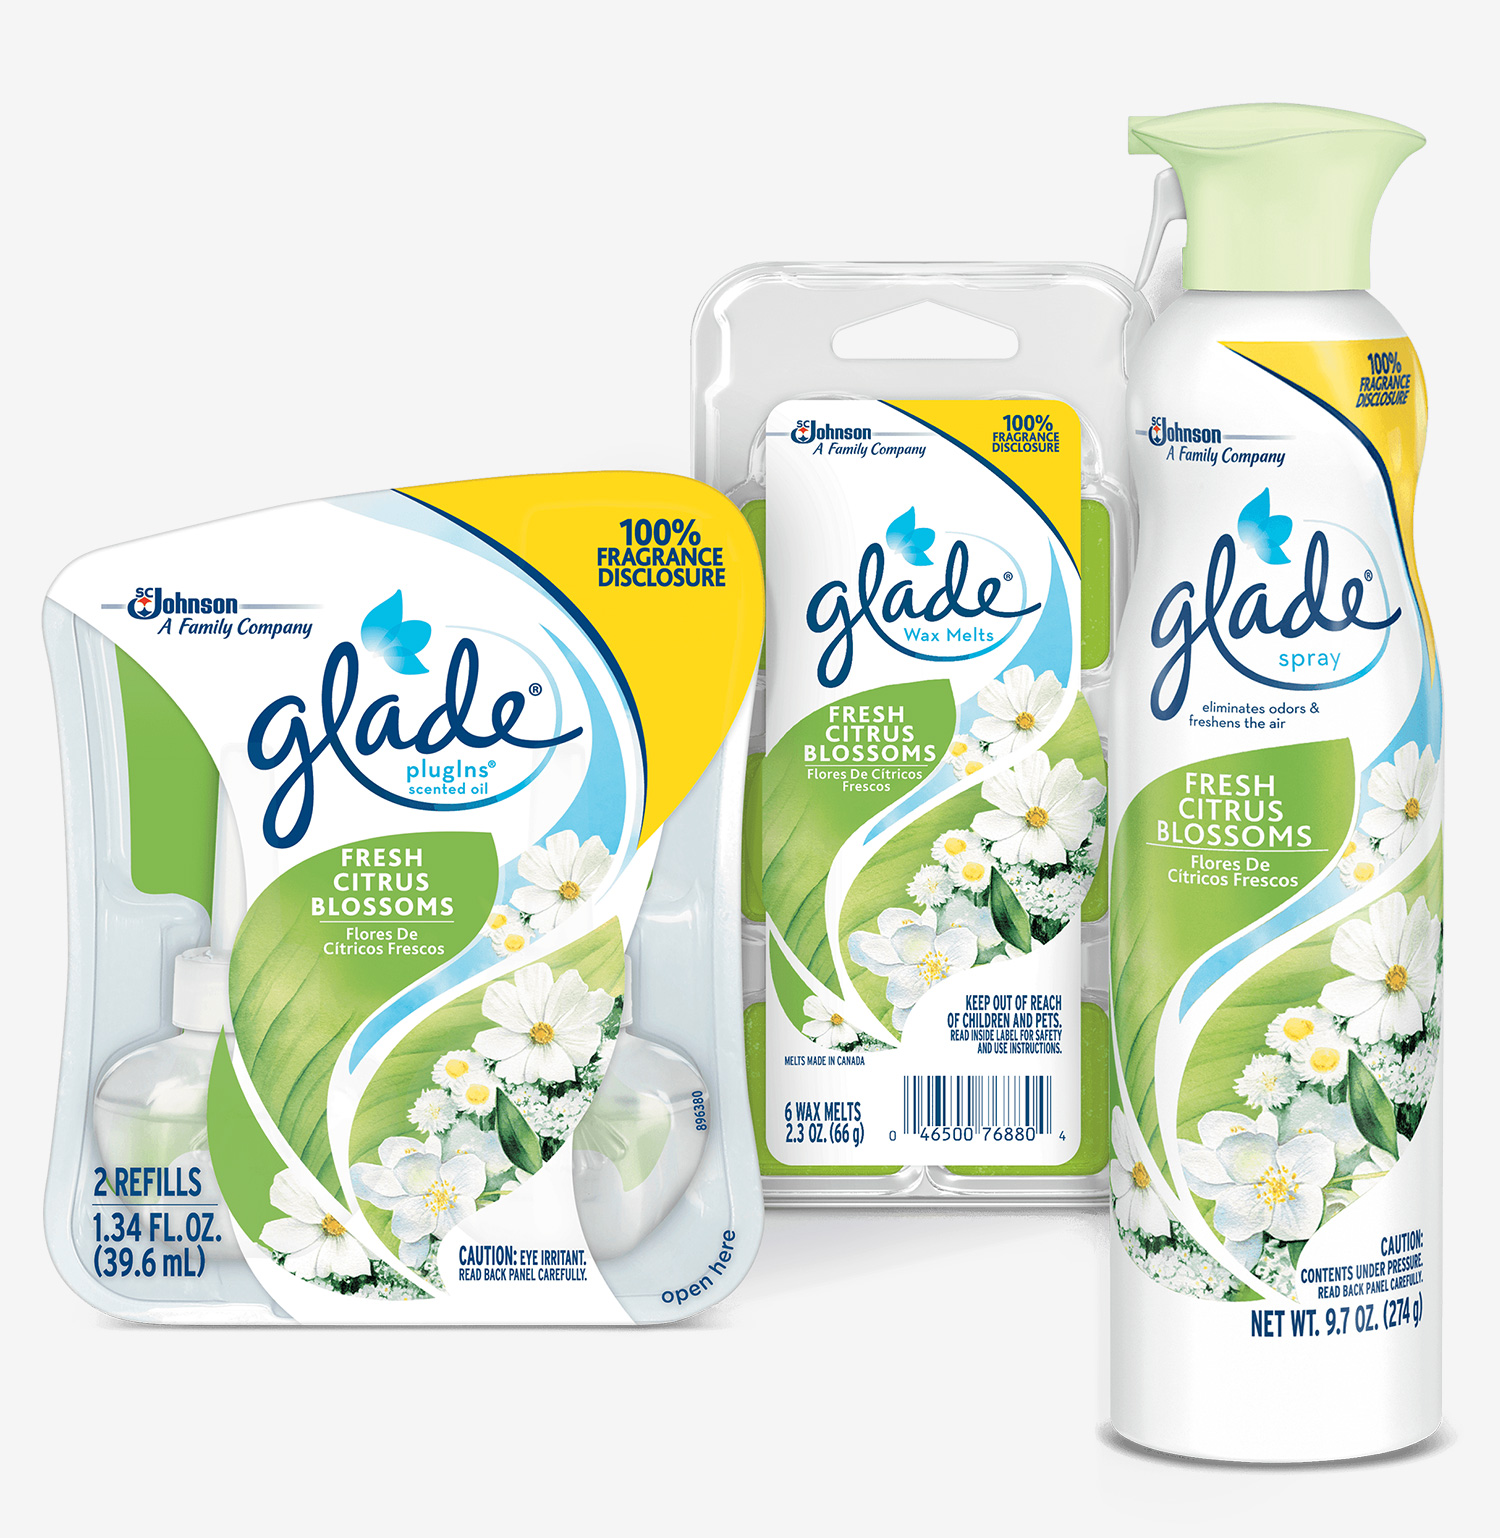 SC Johnson discloses fragrance ingredients in Glade® Fresh Citrus Blossoms collection